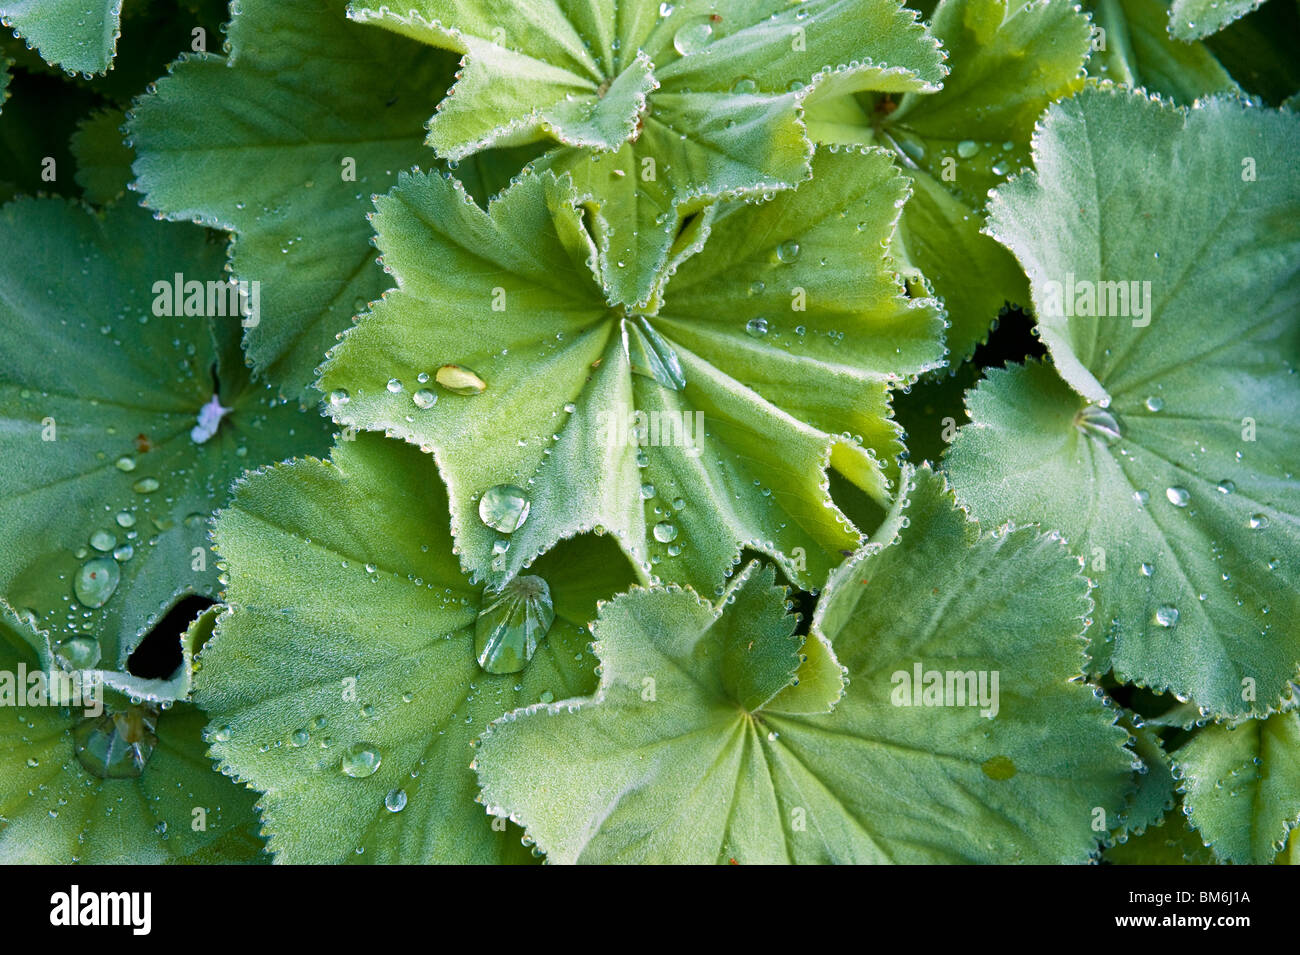 Water droplets on lady's mantle (alchemilla mollis) leaves Stock Photo